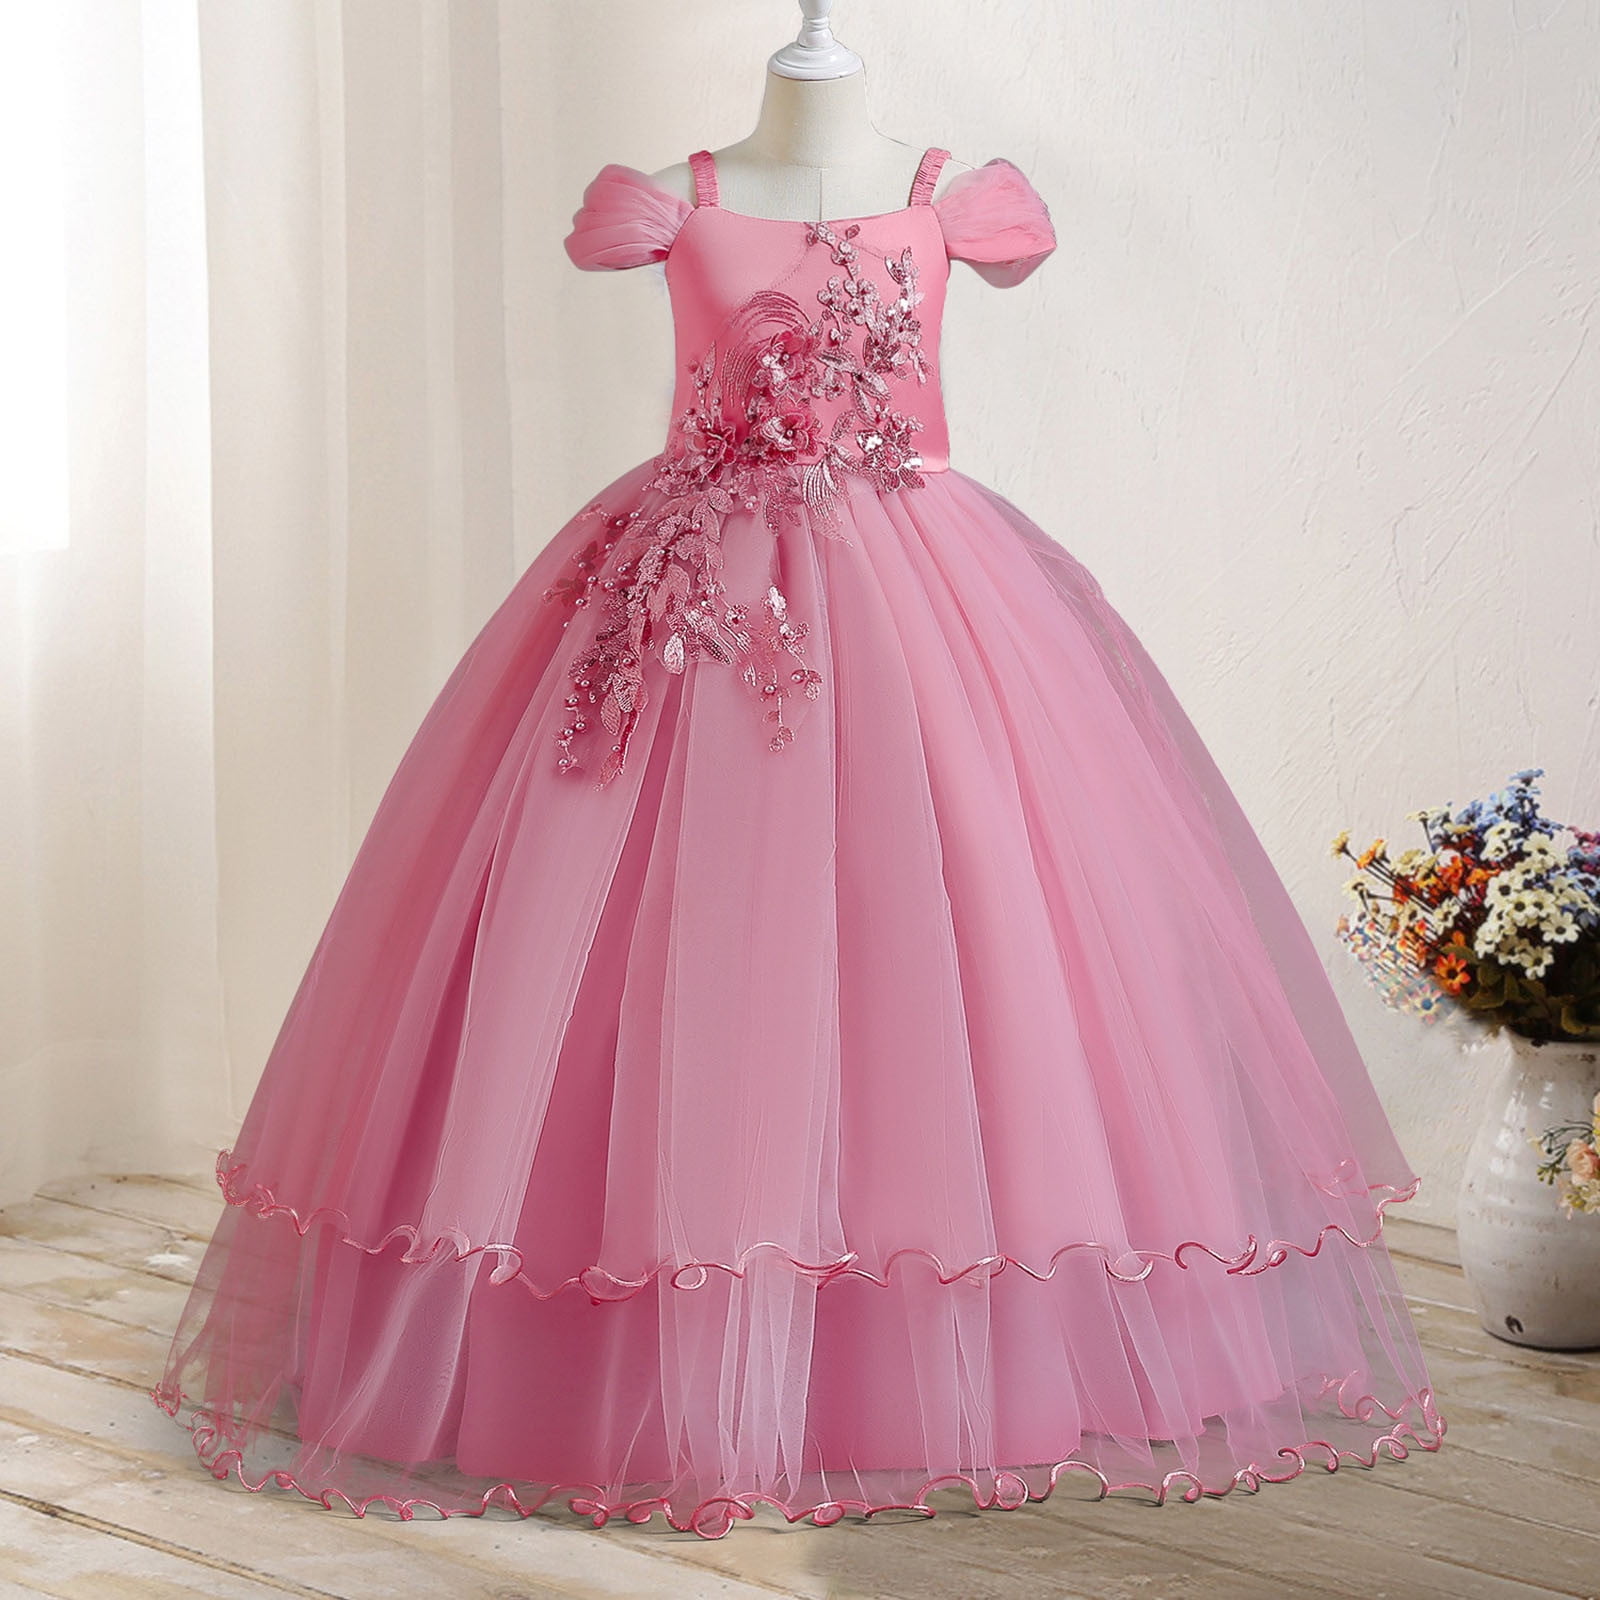 2022 Summer Princess Smocked Dress For Girls Cute Casual Costume For Kids,  Ages 4 12 G220518 From Yanqin05, $12.66 | DHgate.Com